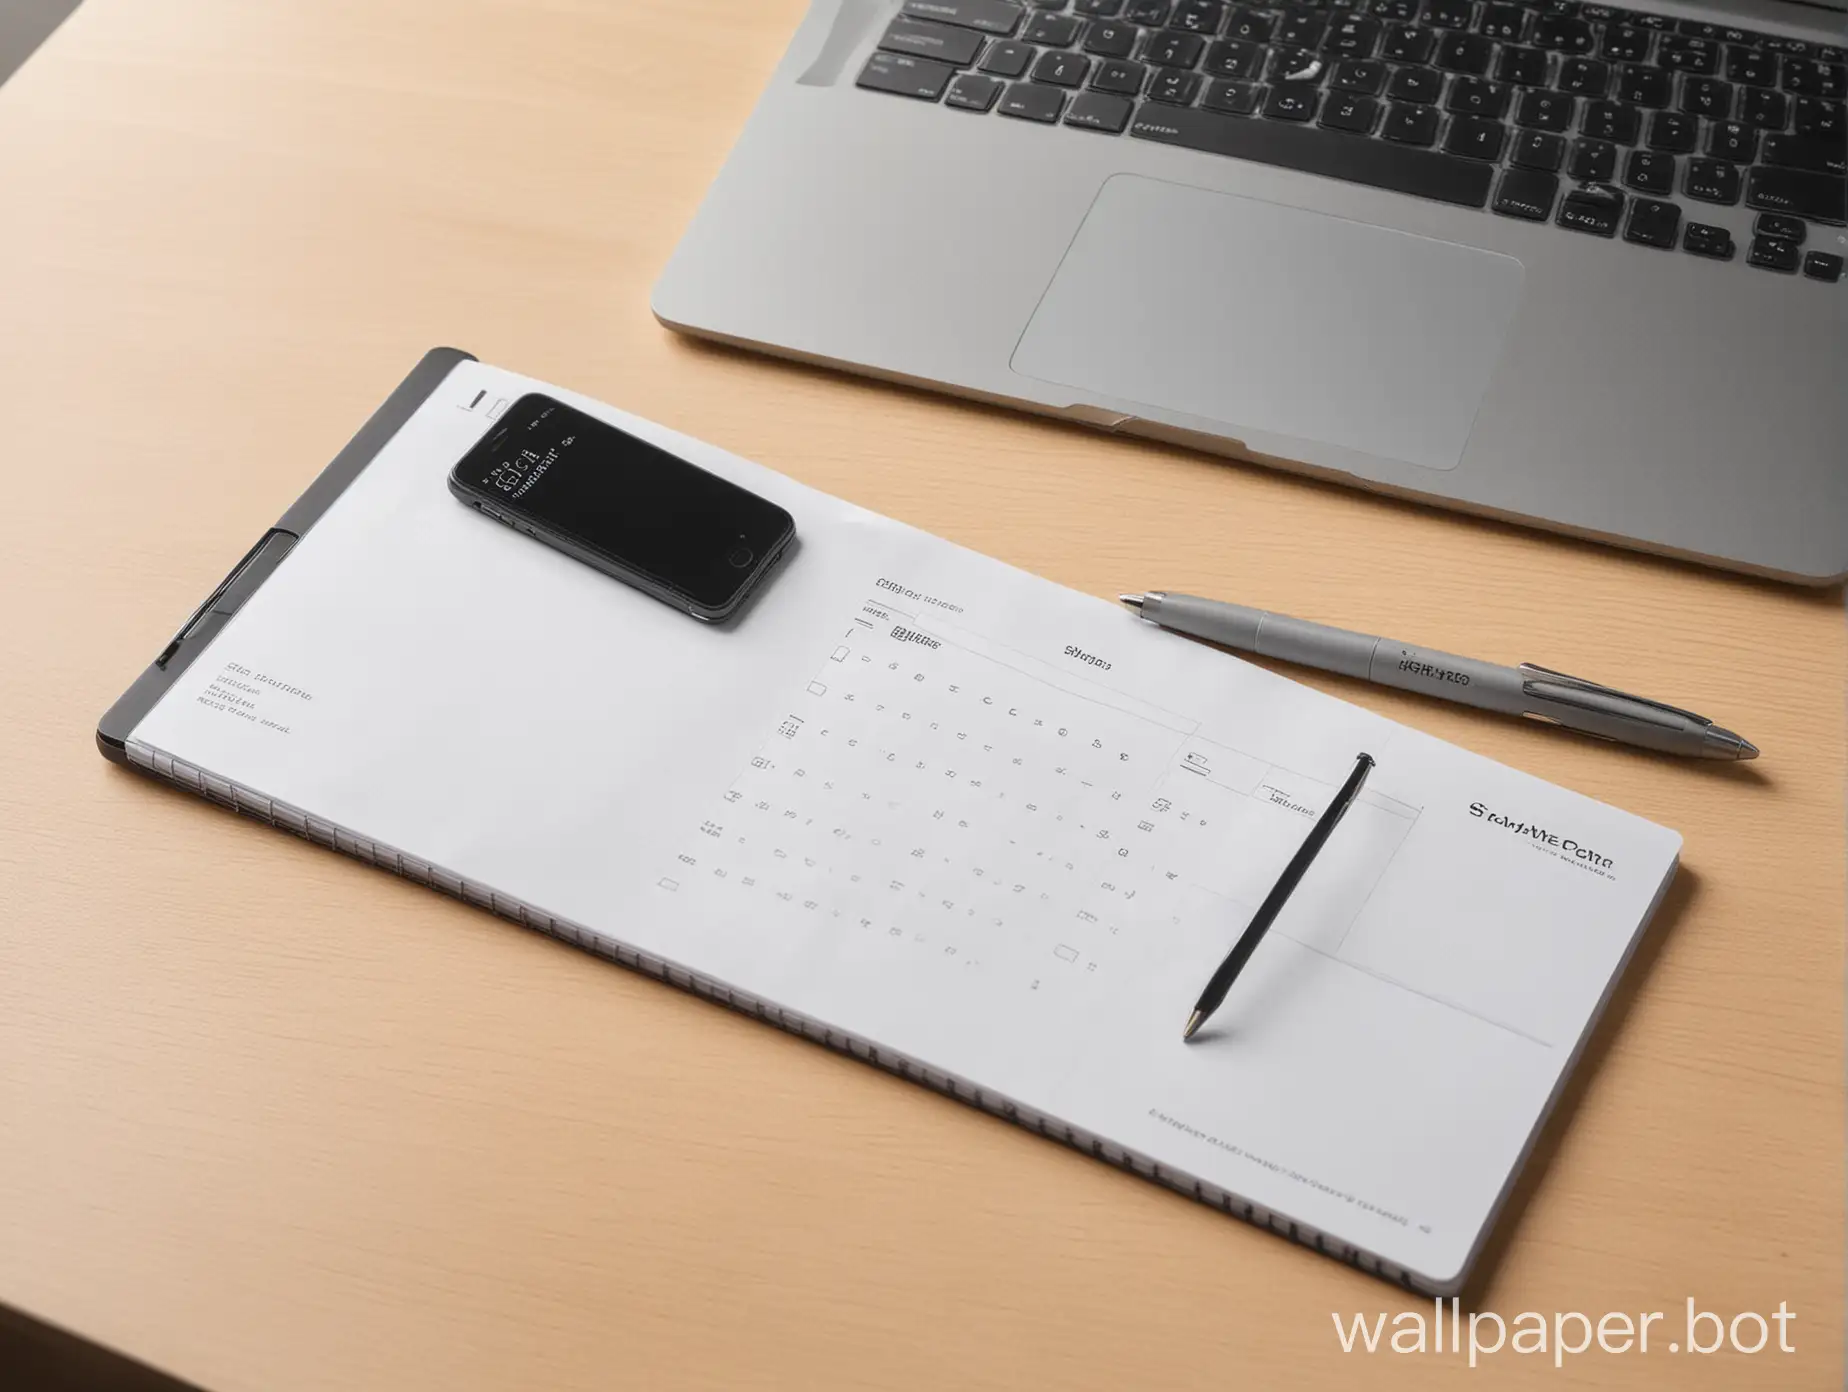 A modern, uncluttered desk setup with a sleek laptop, a minimalist notepad, and a stylish pen.nClose-up shot of a laptop keyboard with a clean desk background.nFlat lay image of a smartphone displaying a simple expense tracking app interface on a clean desk surface.